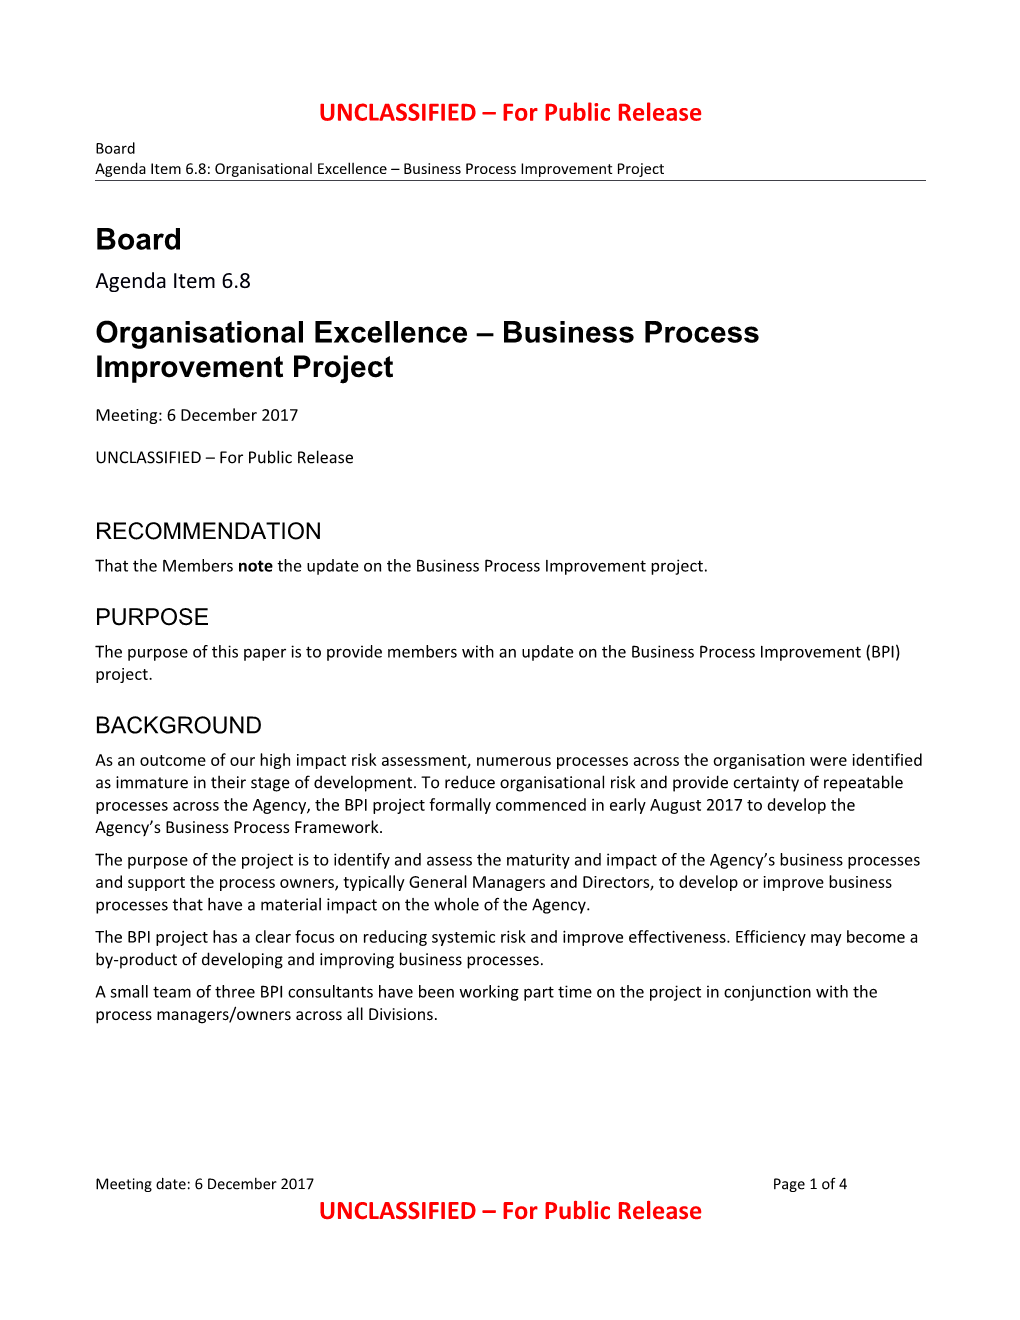 Organisational Excellence Business Process Improvement Project